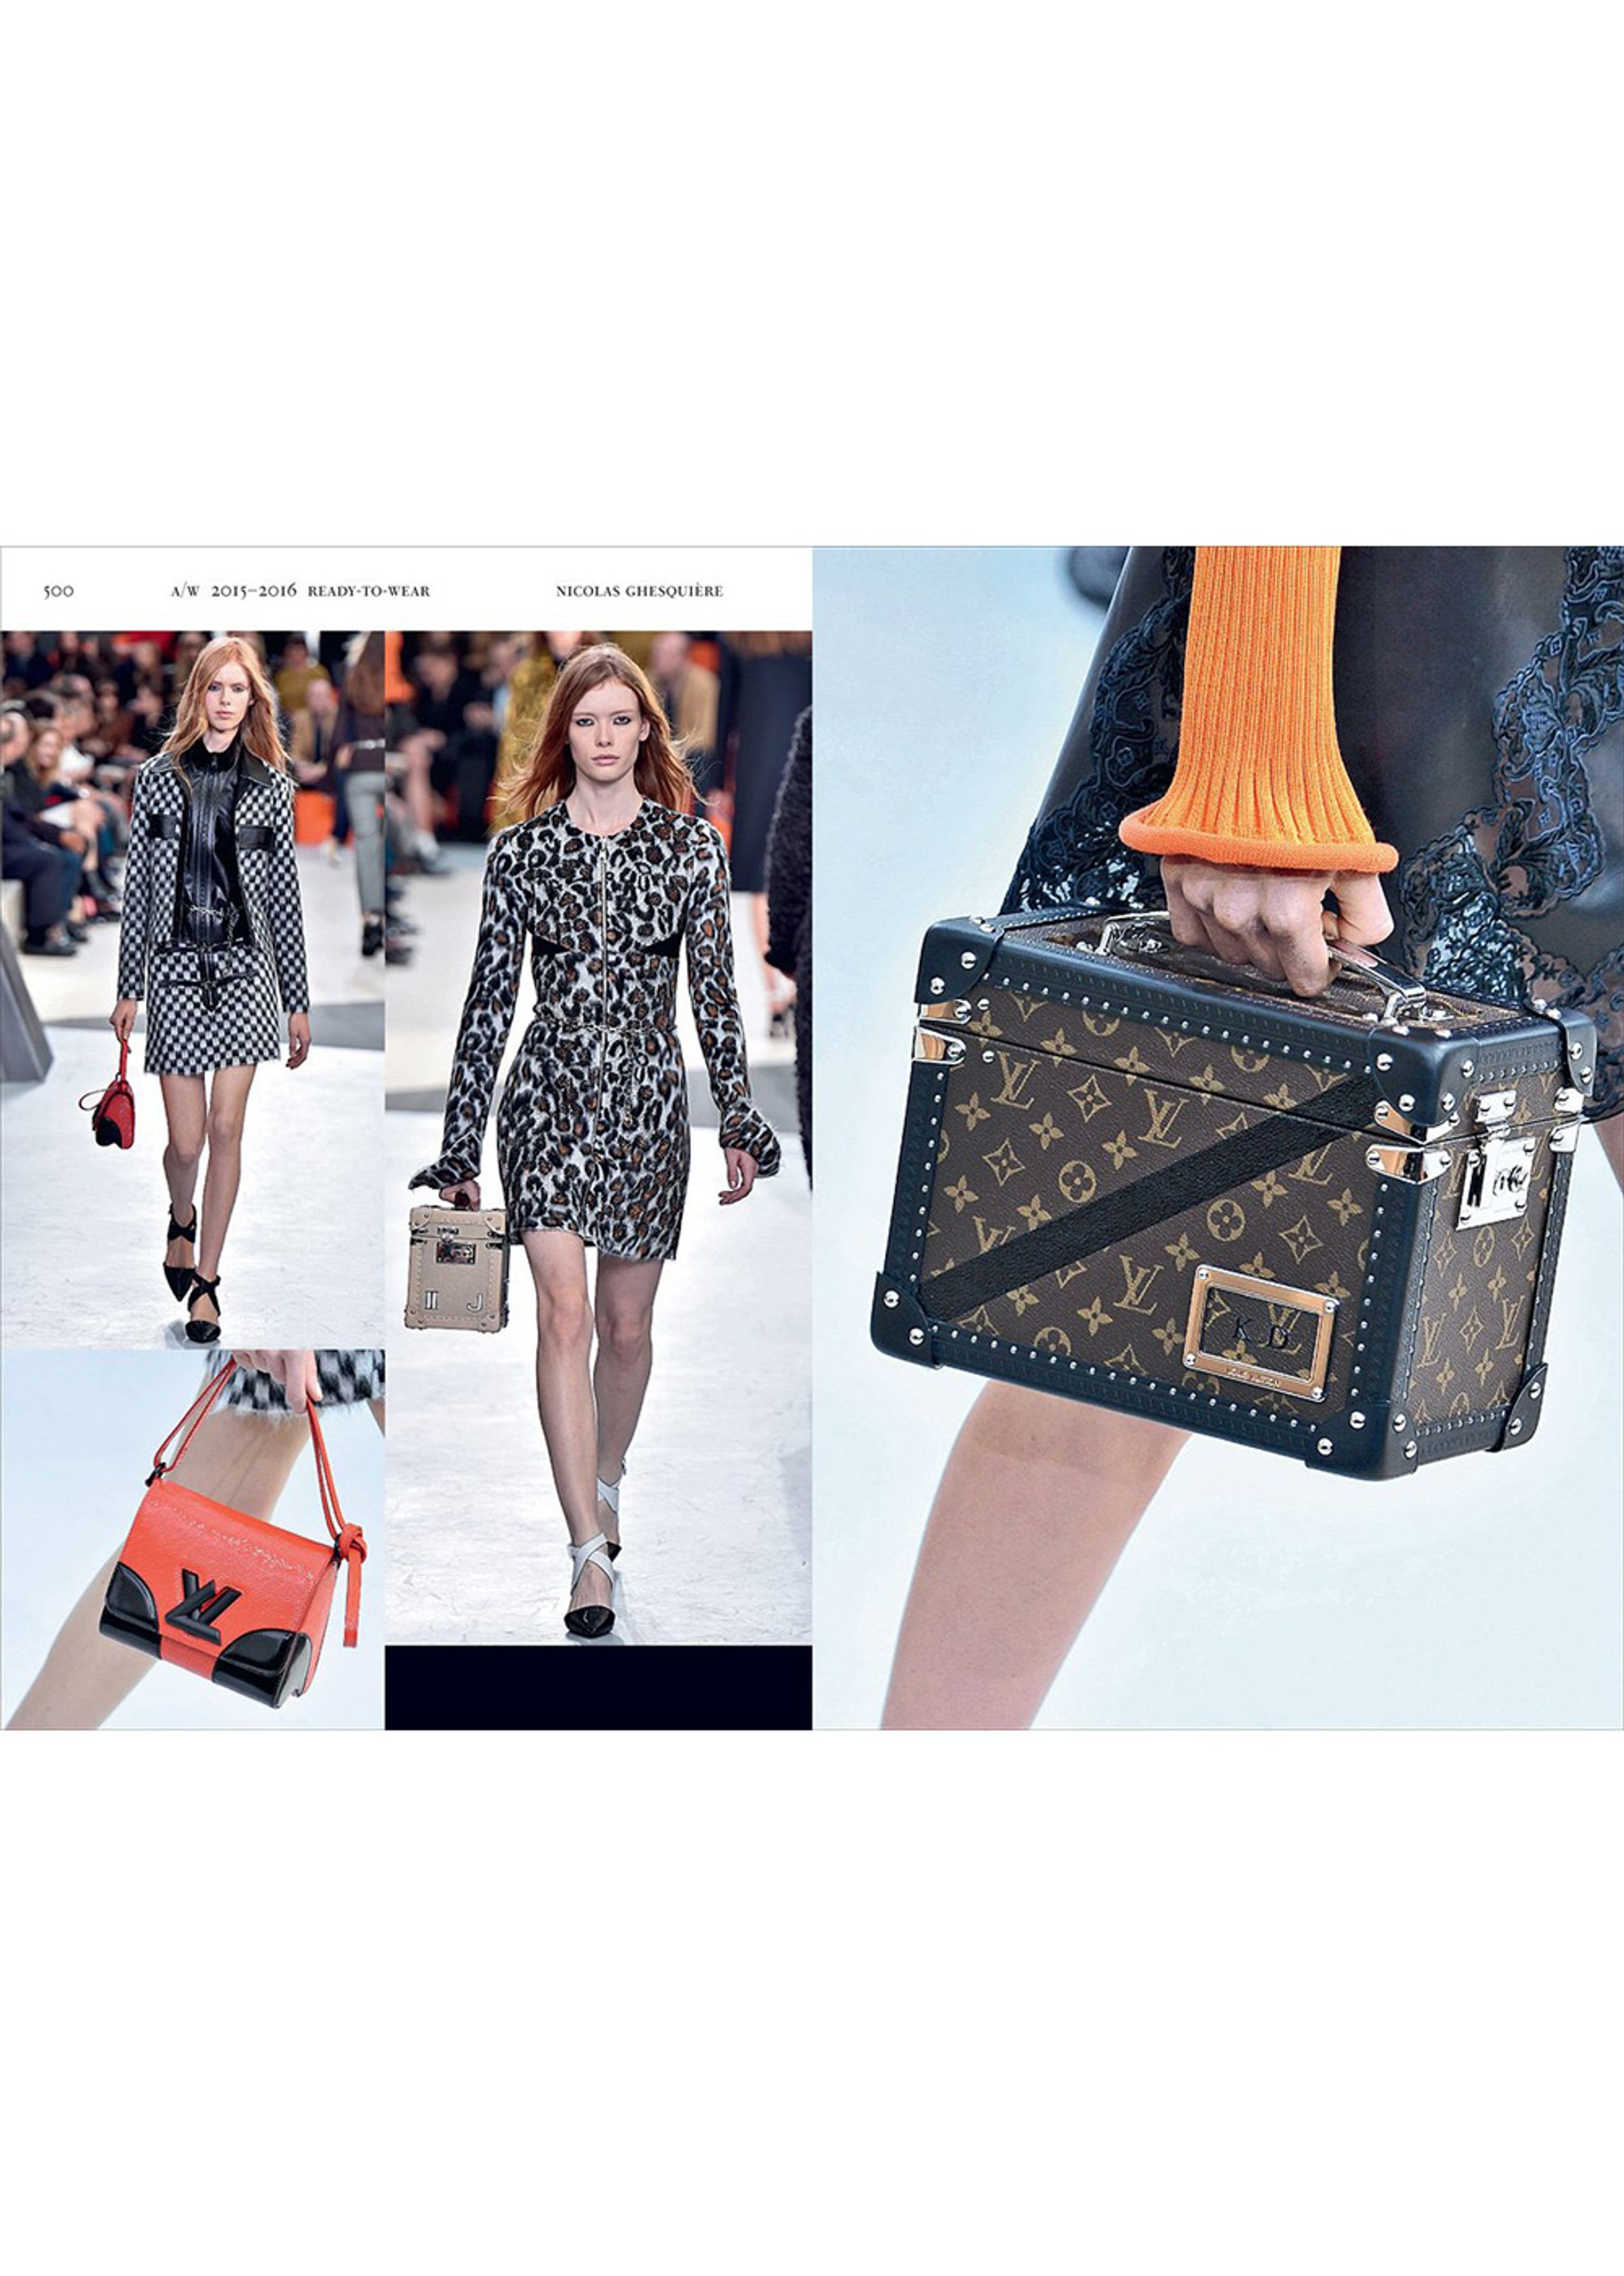 LOUIS VUITTON CATWALK BOOK - Magpies Gifts